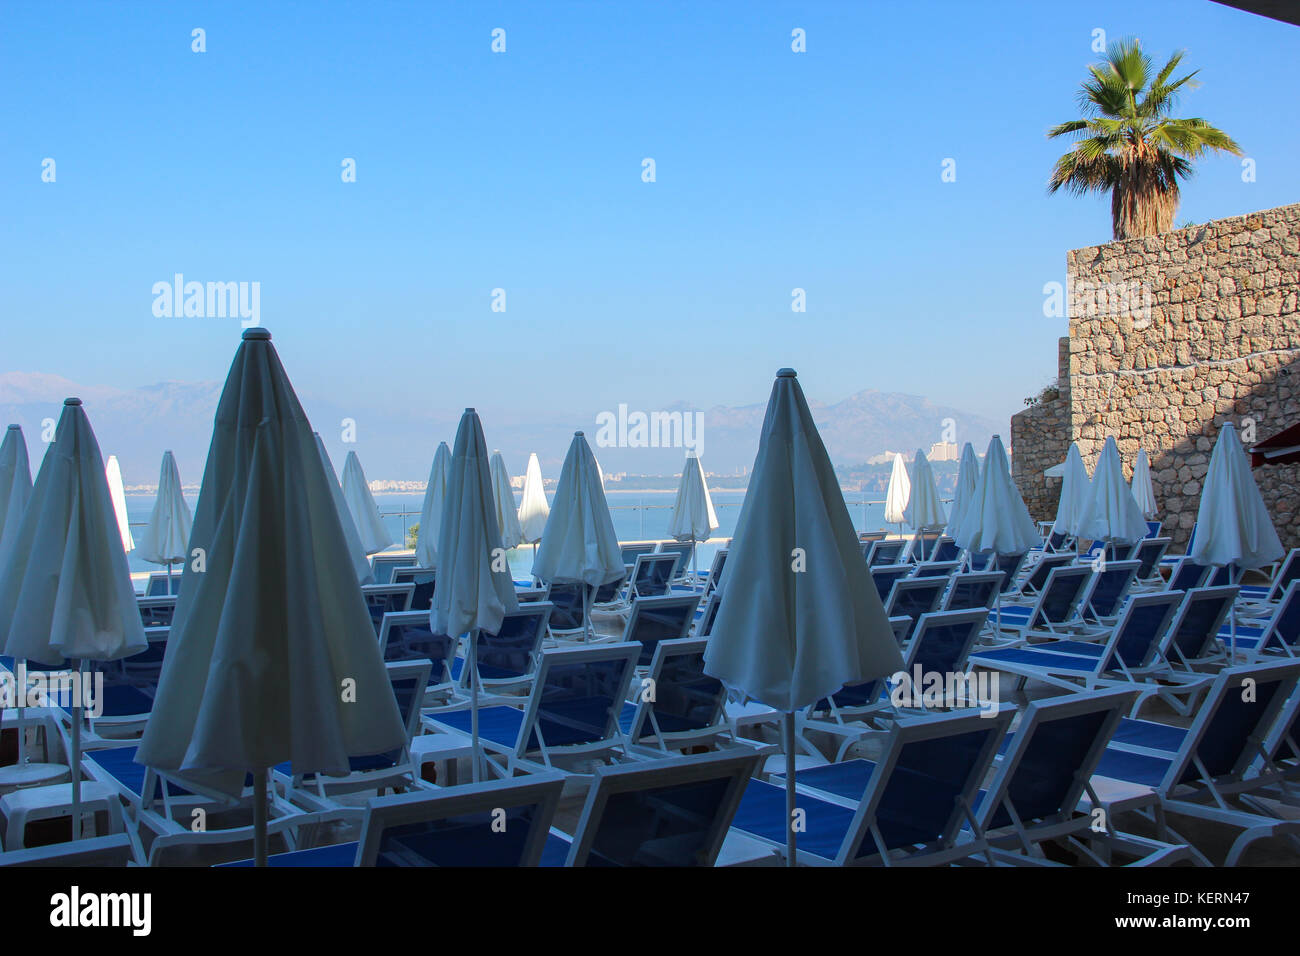 The view of the chairs and closed sunshades against the bright sky, the azure sea, the mountain range. Early morning of a Sunny summer day. travel Stock Photo